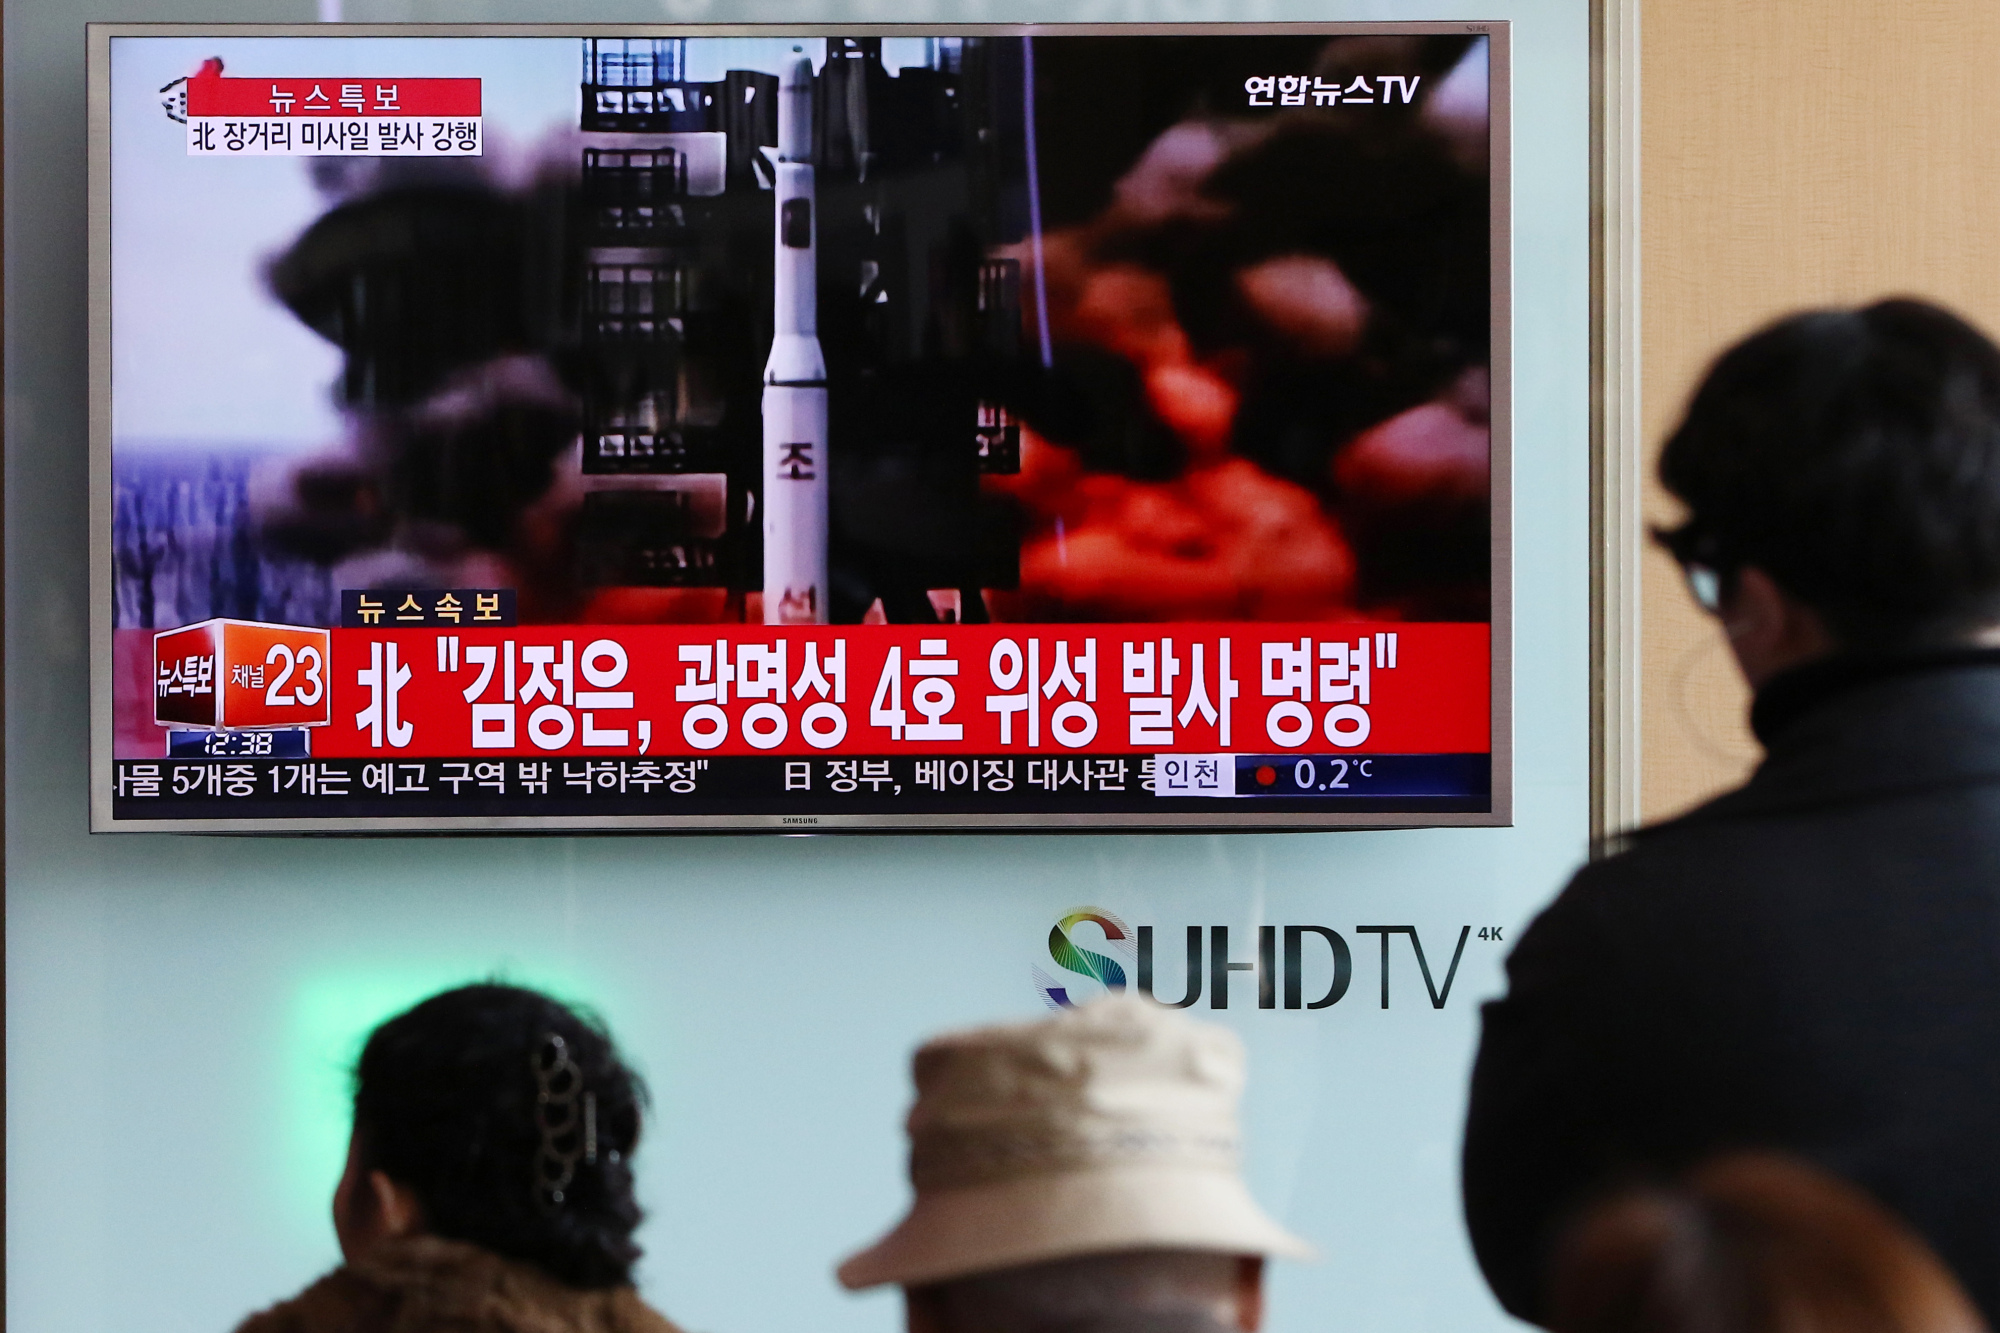 People watch a television screen showing a news broadcast on North Korea's long-range rocket launch at Seoul Station in Seoul, South Korea, on Sunday, Feb. 7, 2016.
